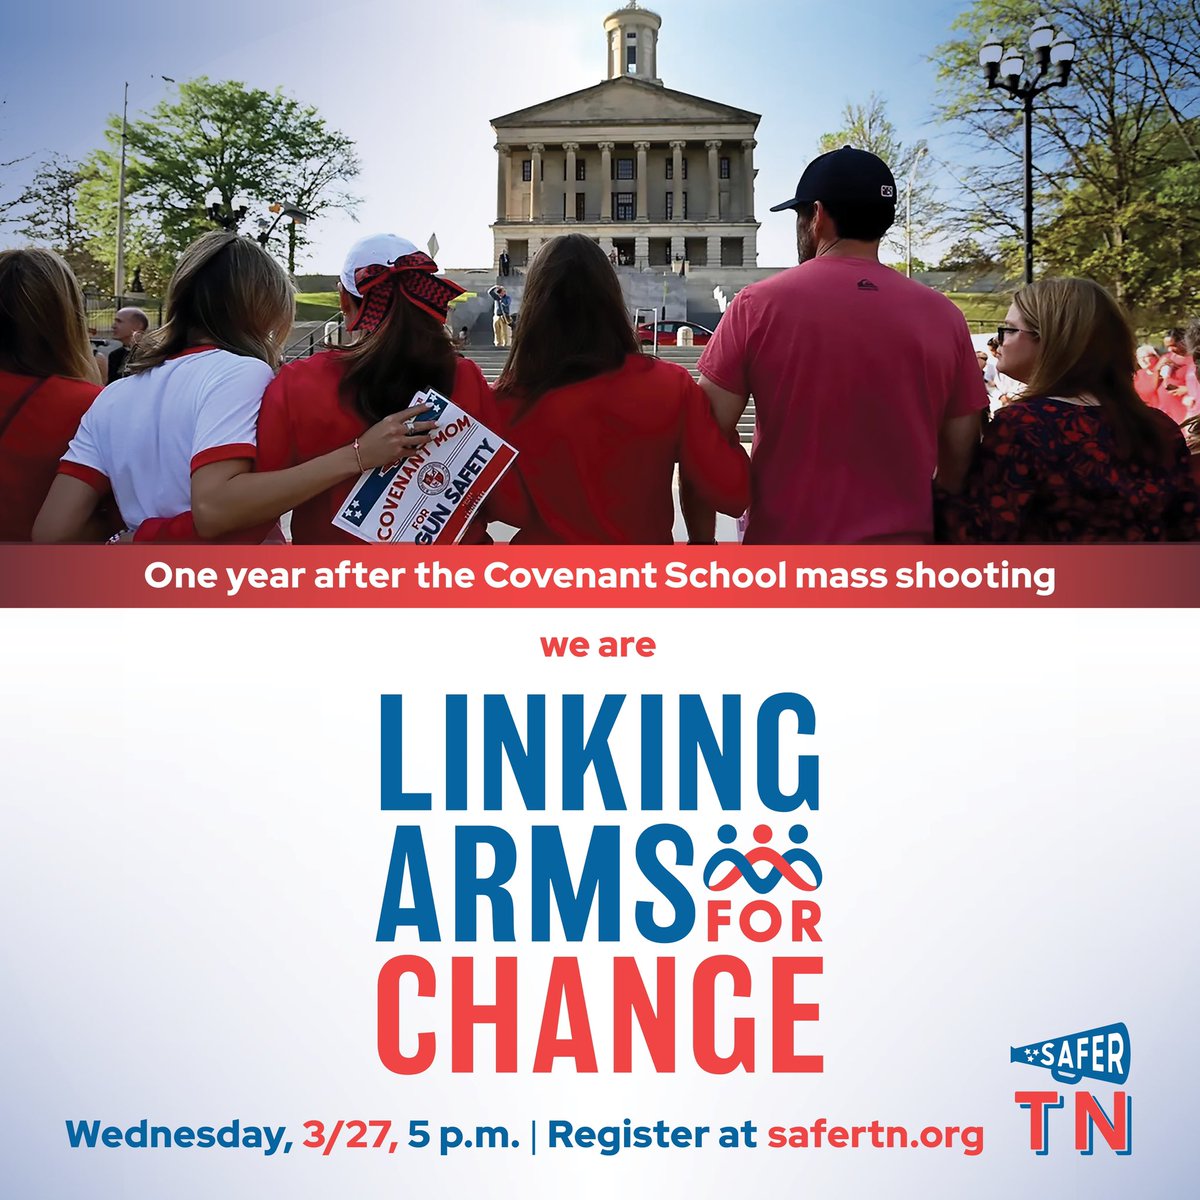 JOIN US LIVE AT 5PM for Linking Arms for Change: safertn.org/livestream Whether you are part of the human chain or joining home/work, you can honor the families of Covenant and all Tennesseans affected by firearm tragedies by joining the livestream of our program.